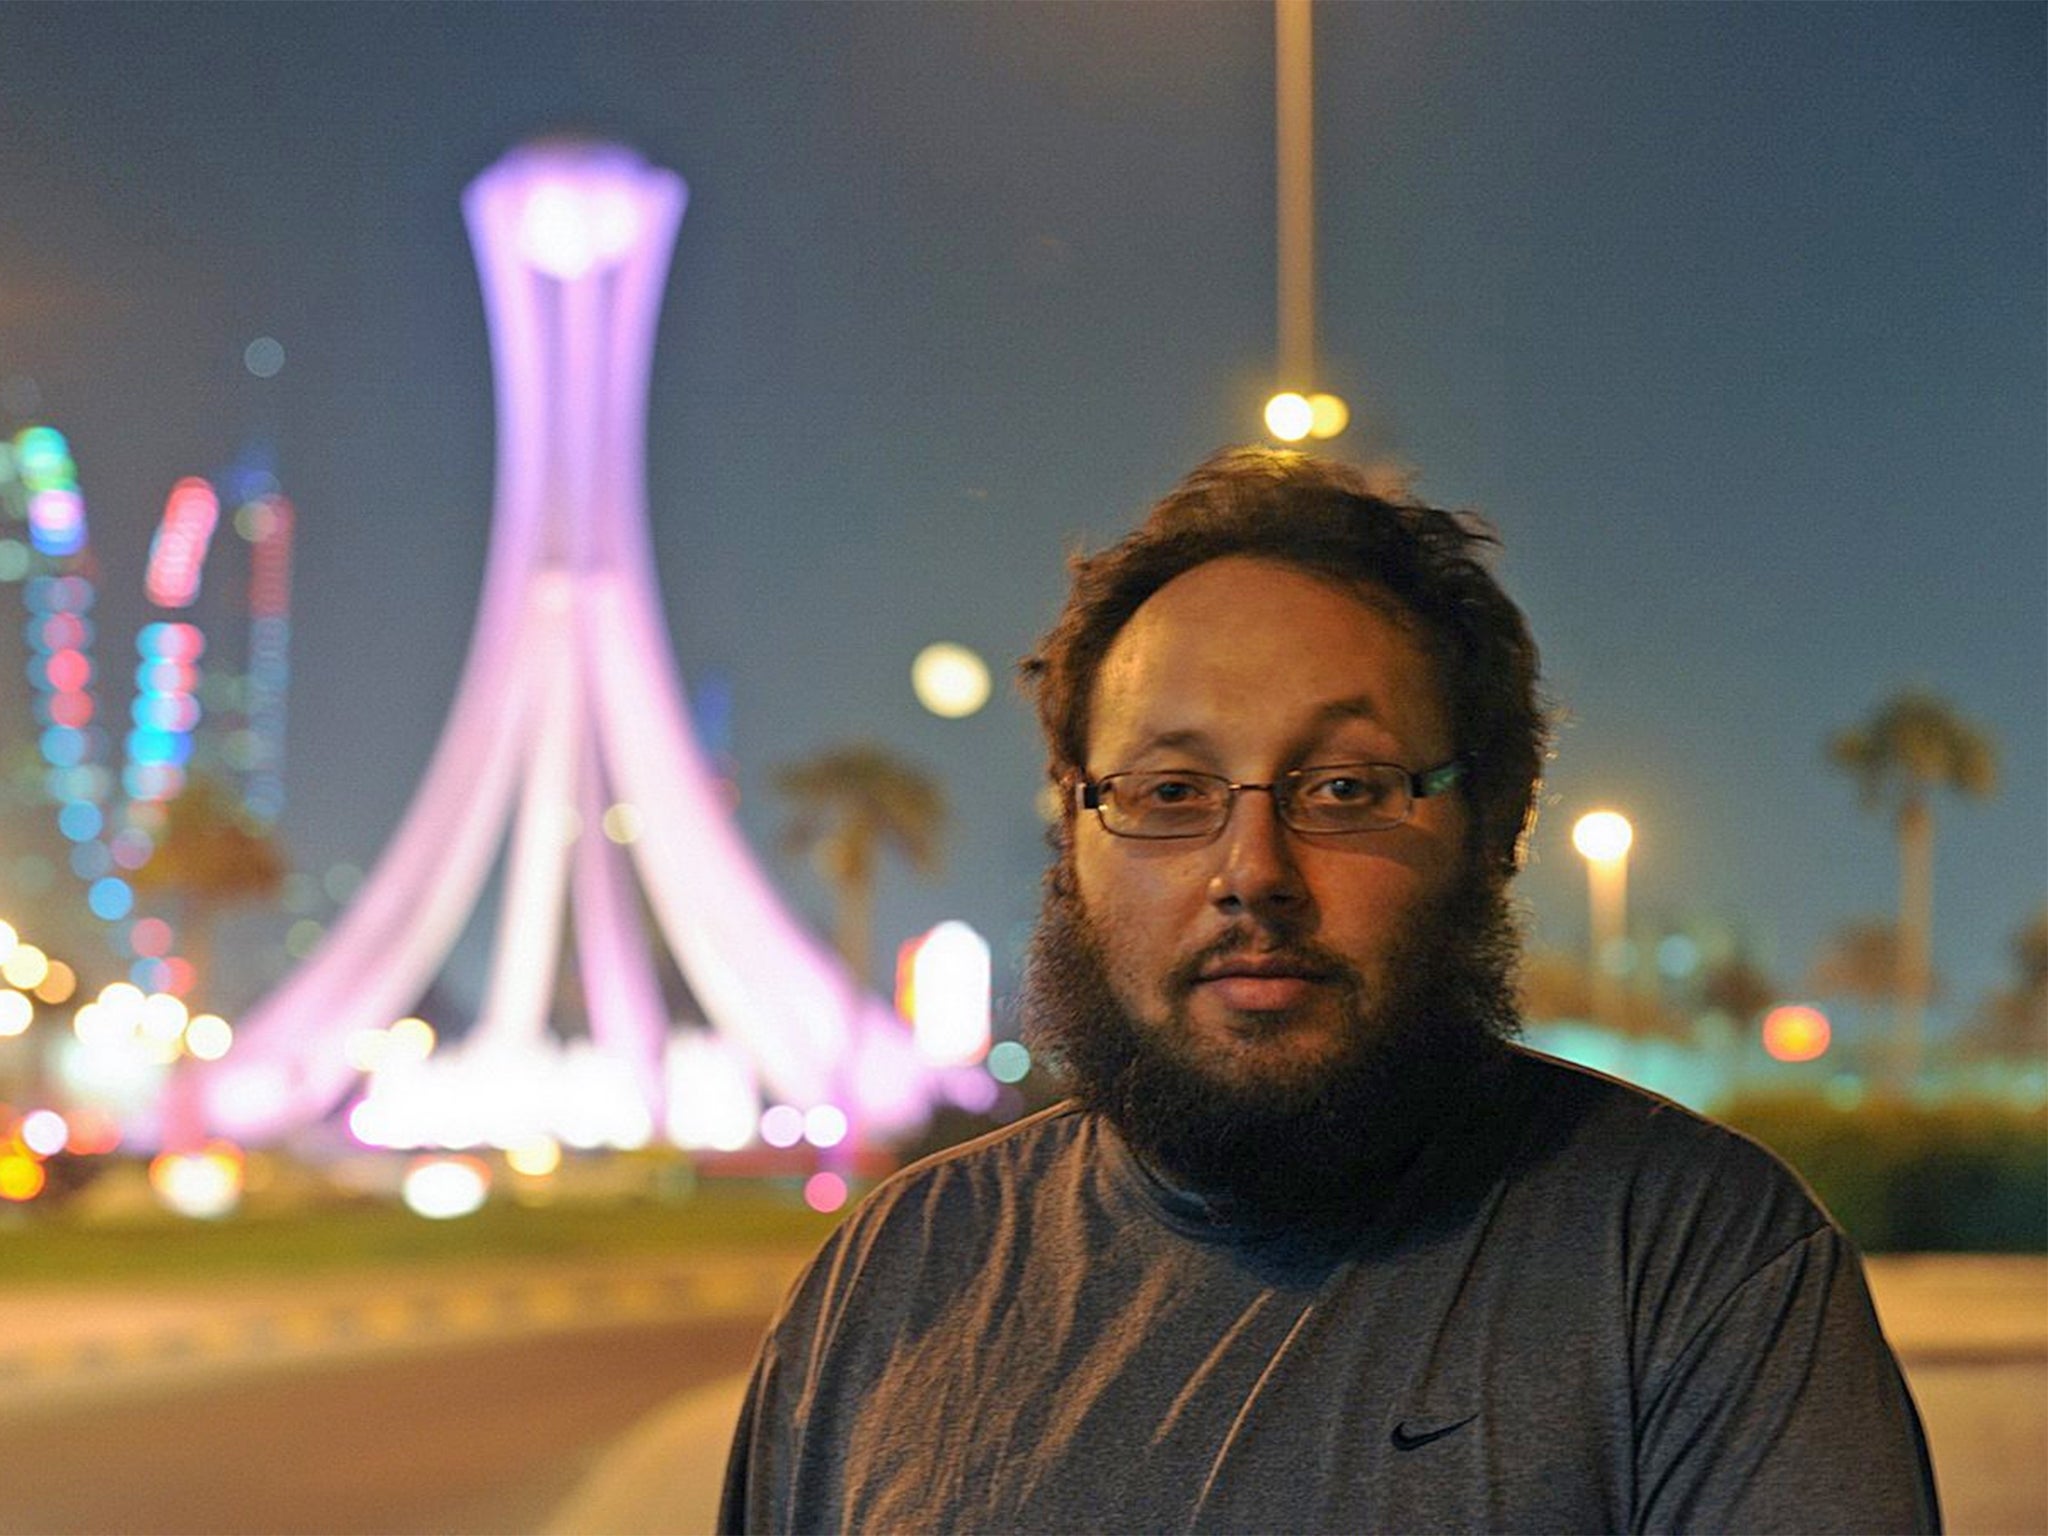 Steven Sotloff pictured in 2010 near Lulu Roundabout in Manama, which later became the iconic center for the 2011 pro-reform protests in Bahrain